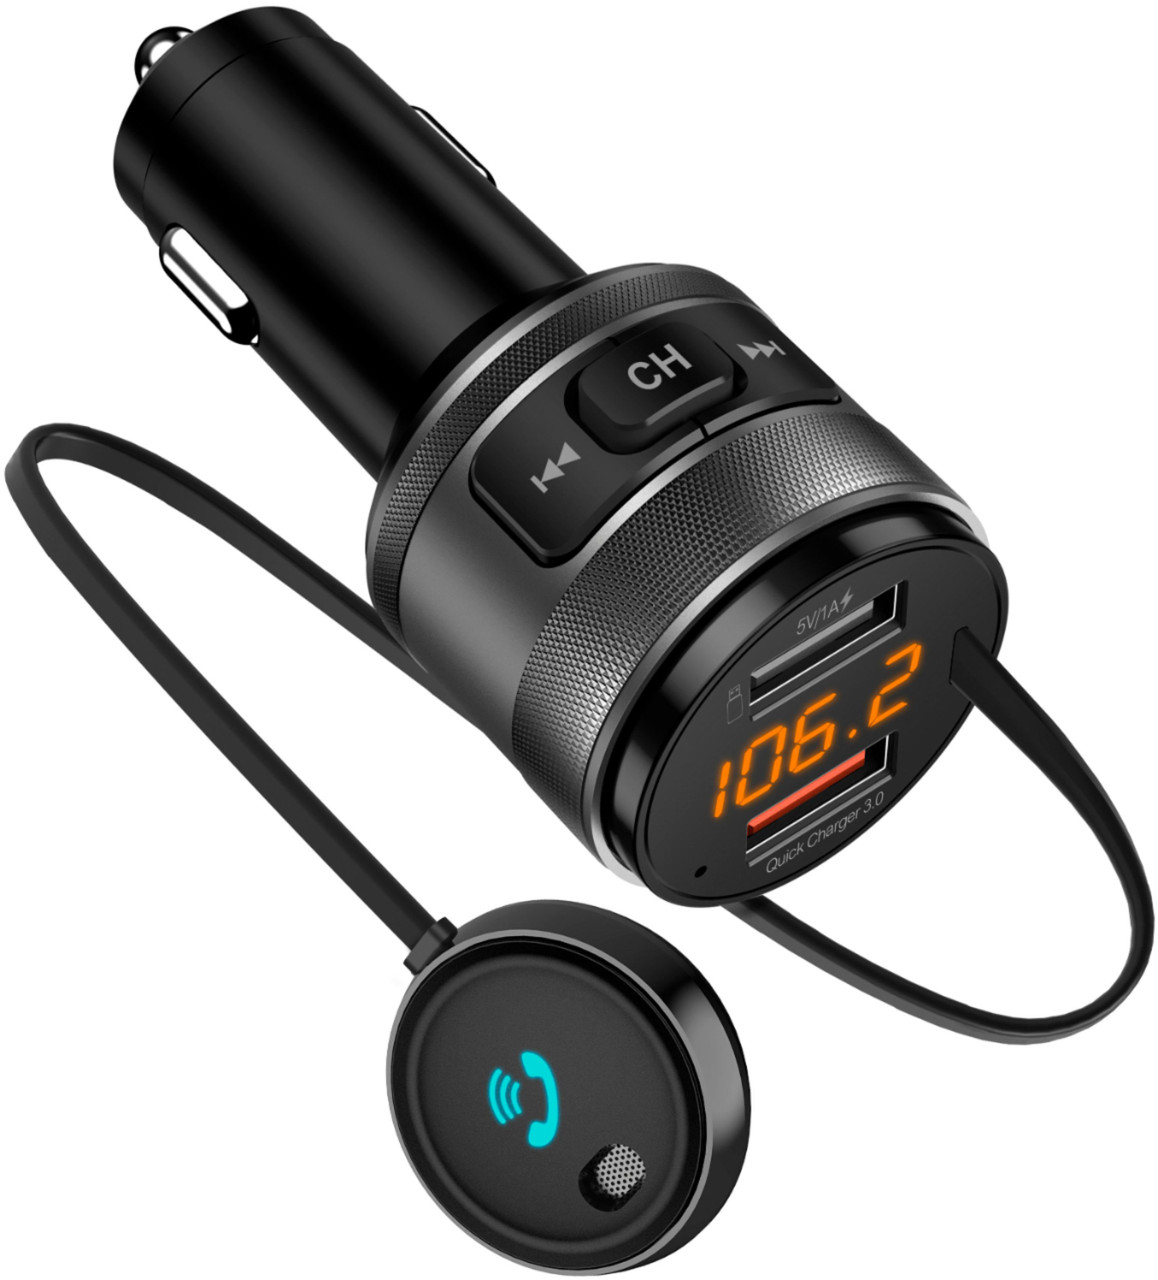 iSimple - Bluetooth 5.0 FM Transmitter with External Microphone for Music Streaming, Charging, and Hands-Free Calling - Black